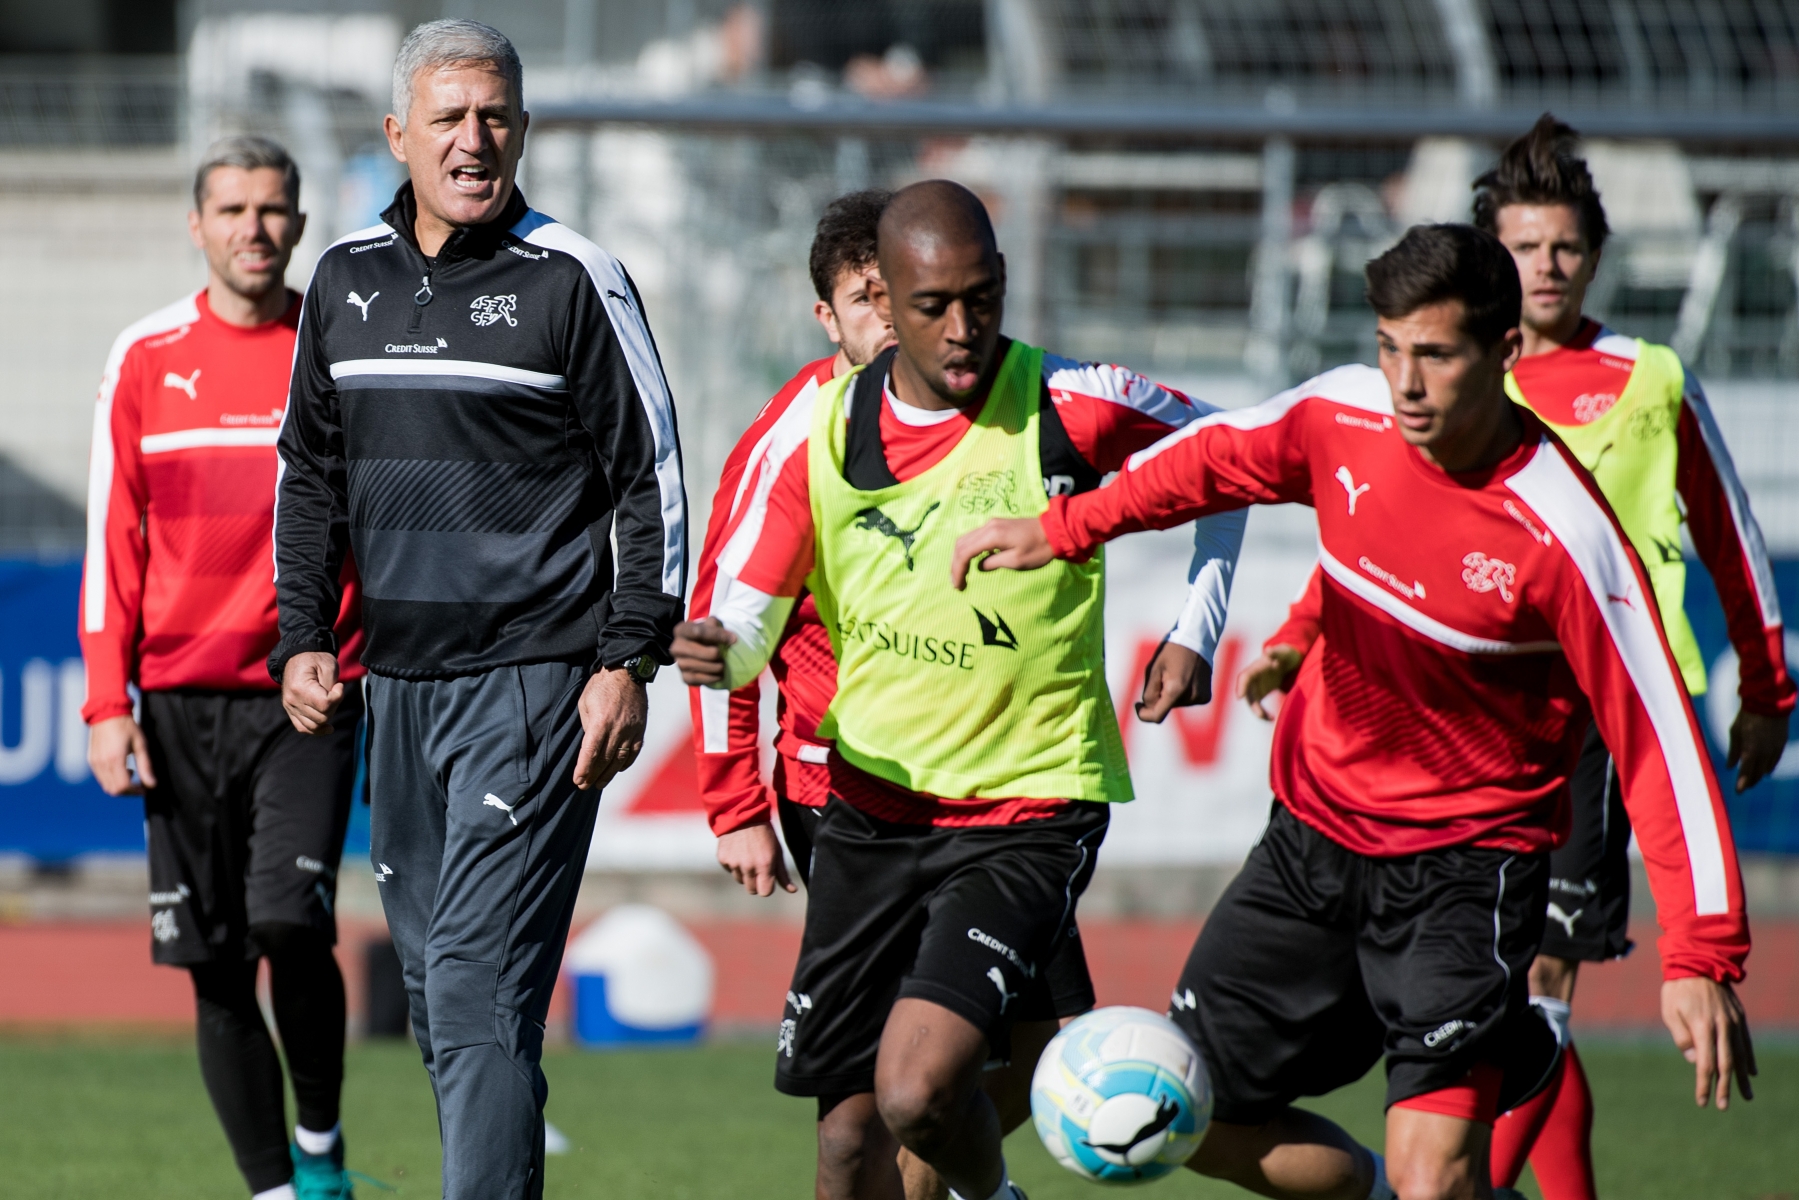 Switzerland's national soccer team with trainer Vladimir Petkovic, left, during a training session in Lugano, Switzerland, on Tuesday, November 8, 2016. Switzerland is scheduled to play a 2018 Fifa World Cup Russia group B qualification soccer match against Faroe Islands on Sunday, November 13, 2016. (KEYSTONE/Ti-Press/Gabriele Putzu) FUSSBALL WM 2018 QUALIFIKATION TEAM SCHWEIZ TRAINING